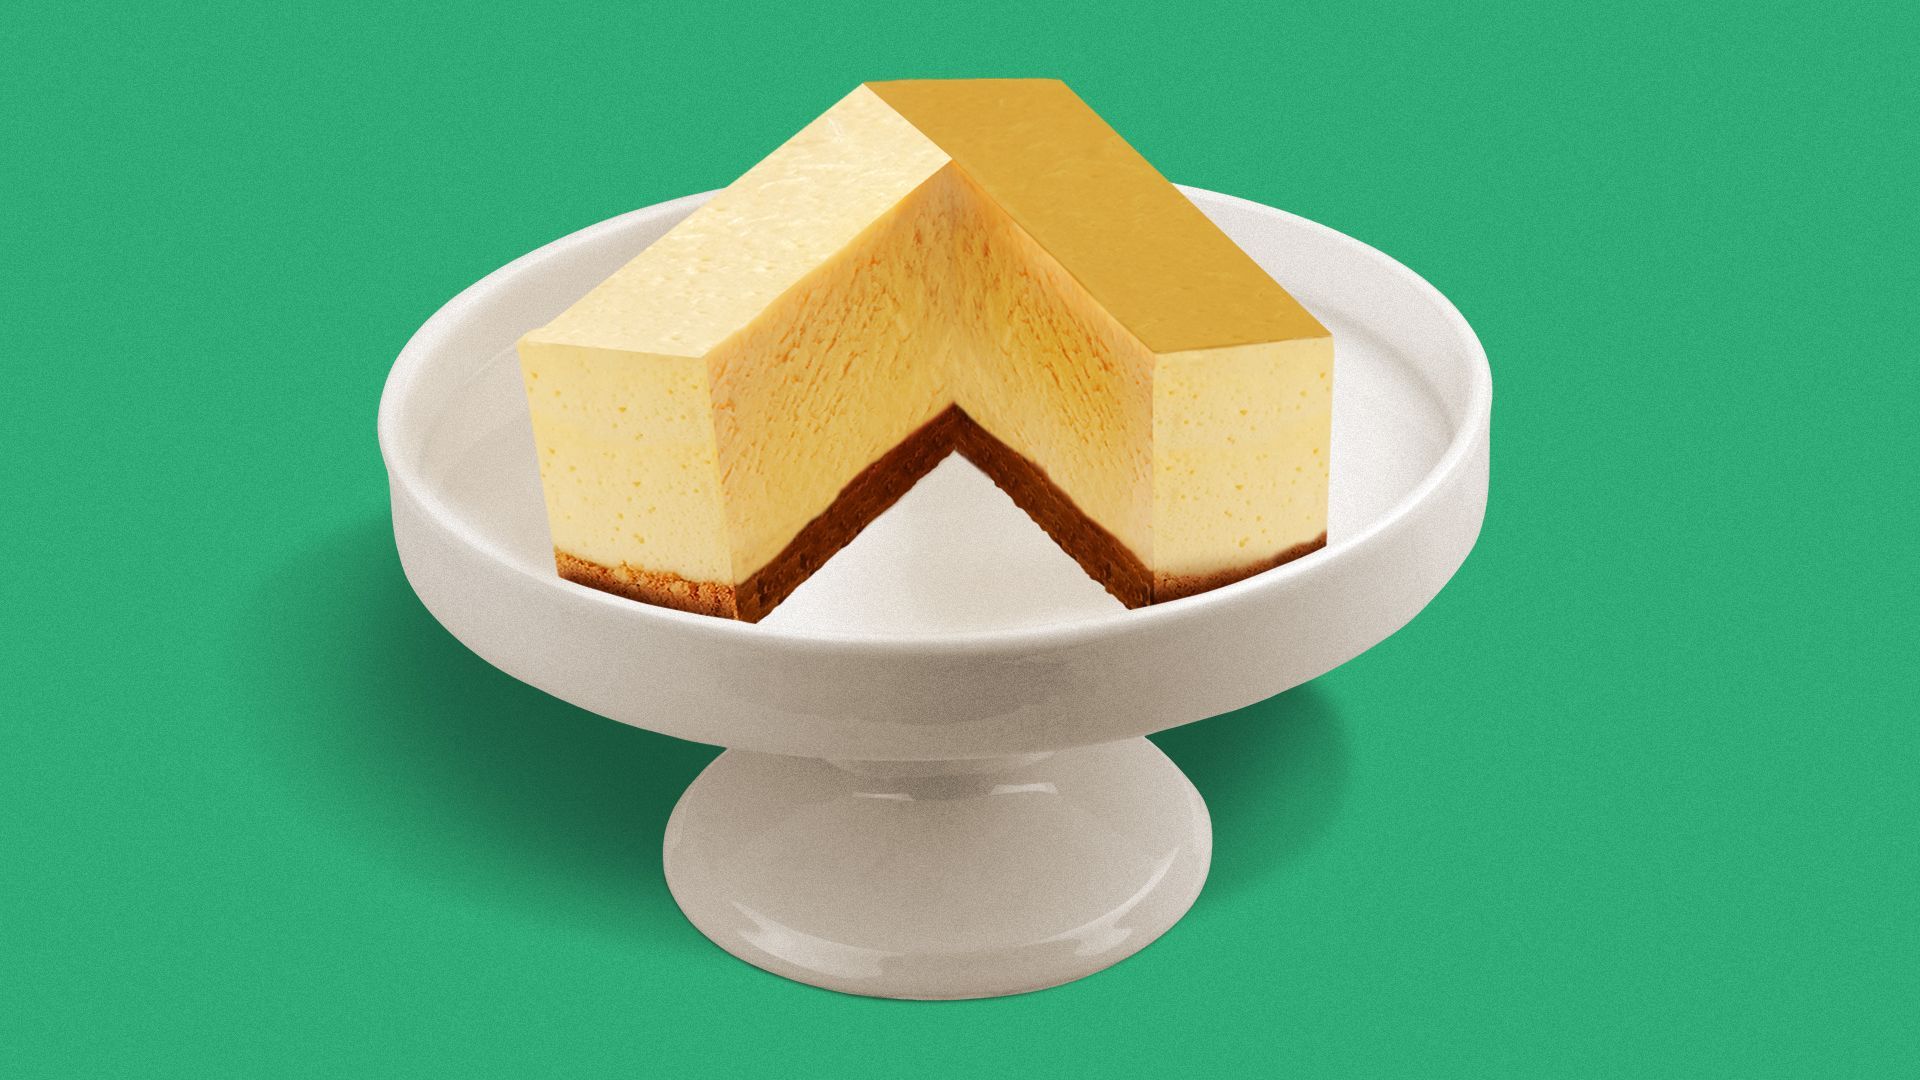 Illustration of a cheesecake shaped like the Axios logo.